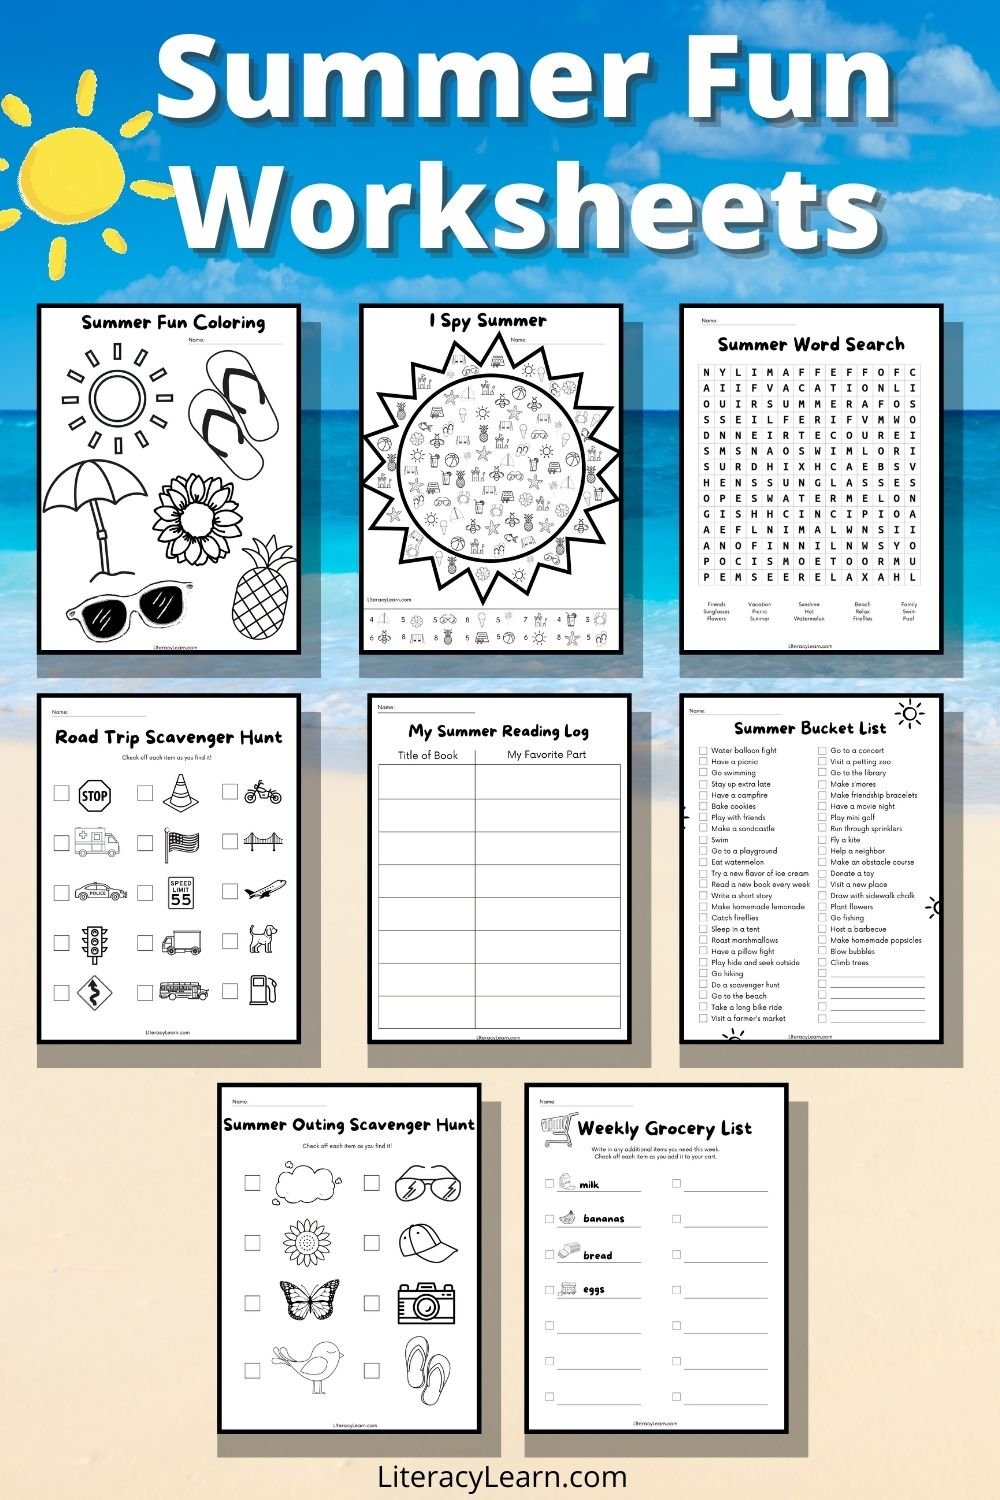 Pinterest graphic with 8 worksheets on a beach background with text, "Summer Fun Worksheets."